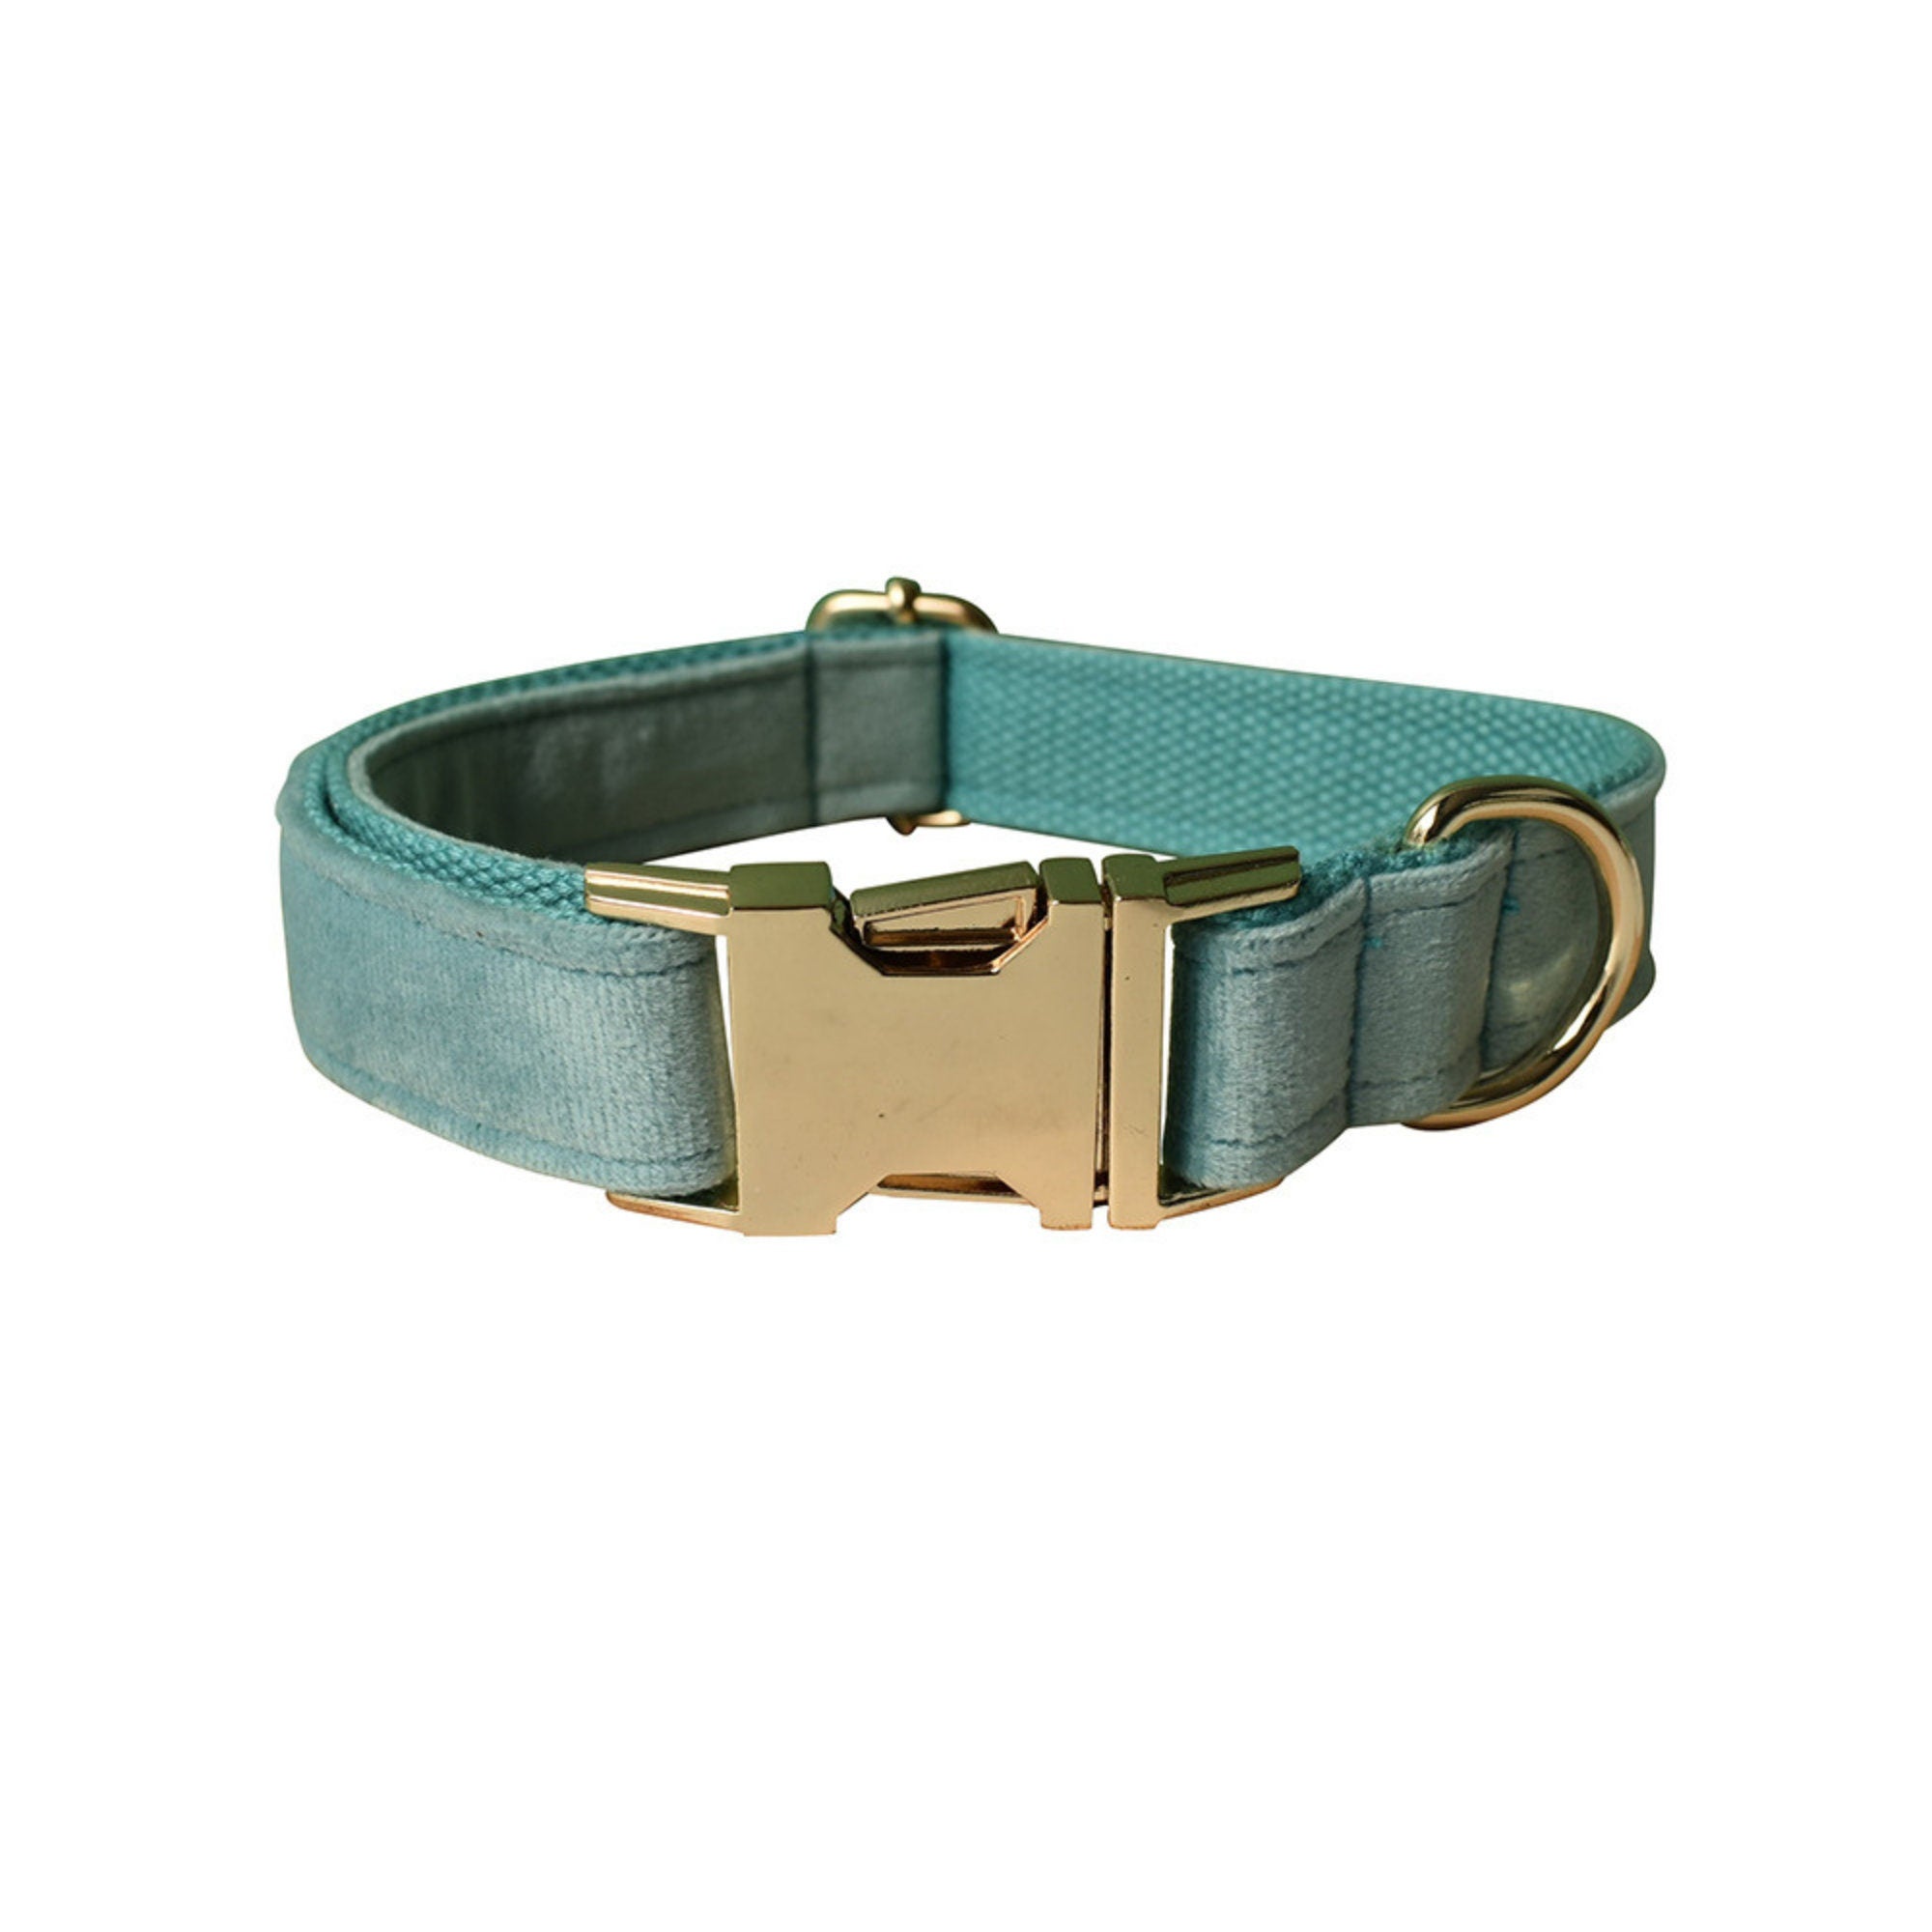 Aqua Thick Velvet Dog Collar and Lead Set and Harness Combo